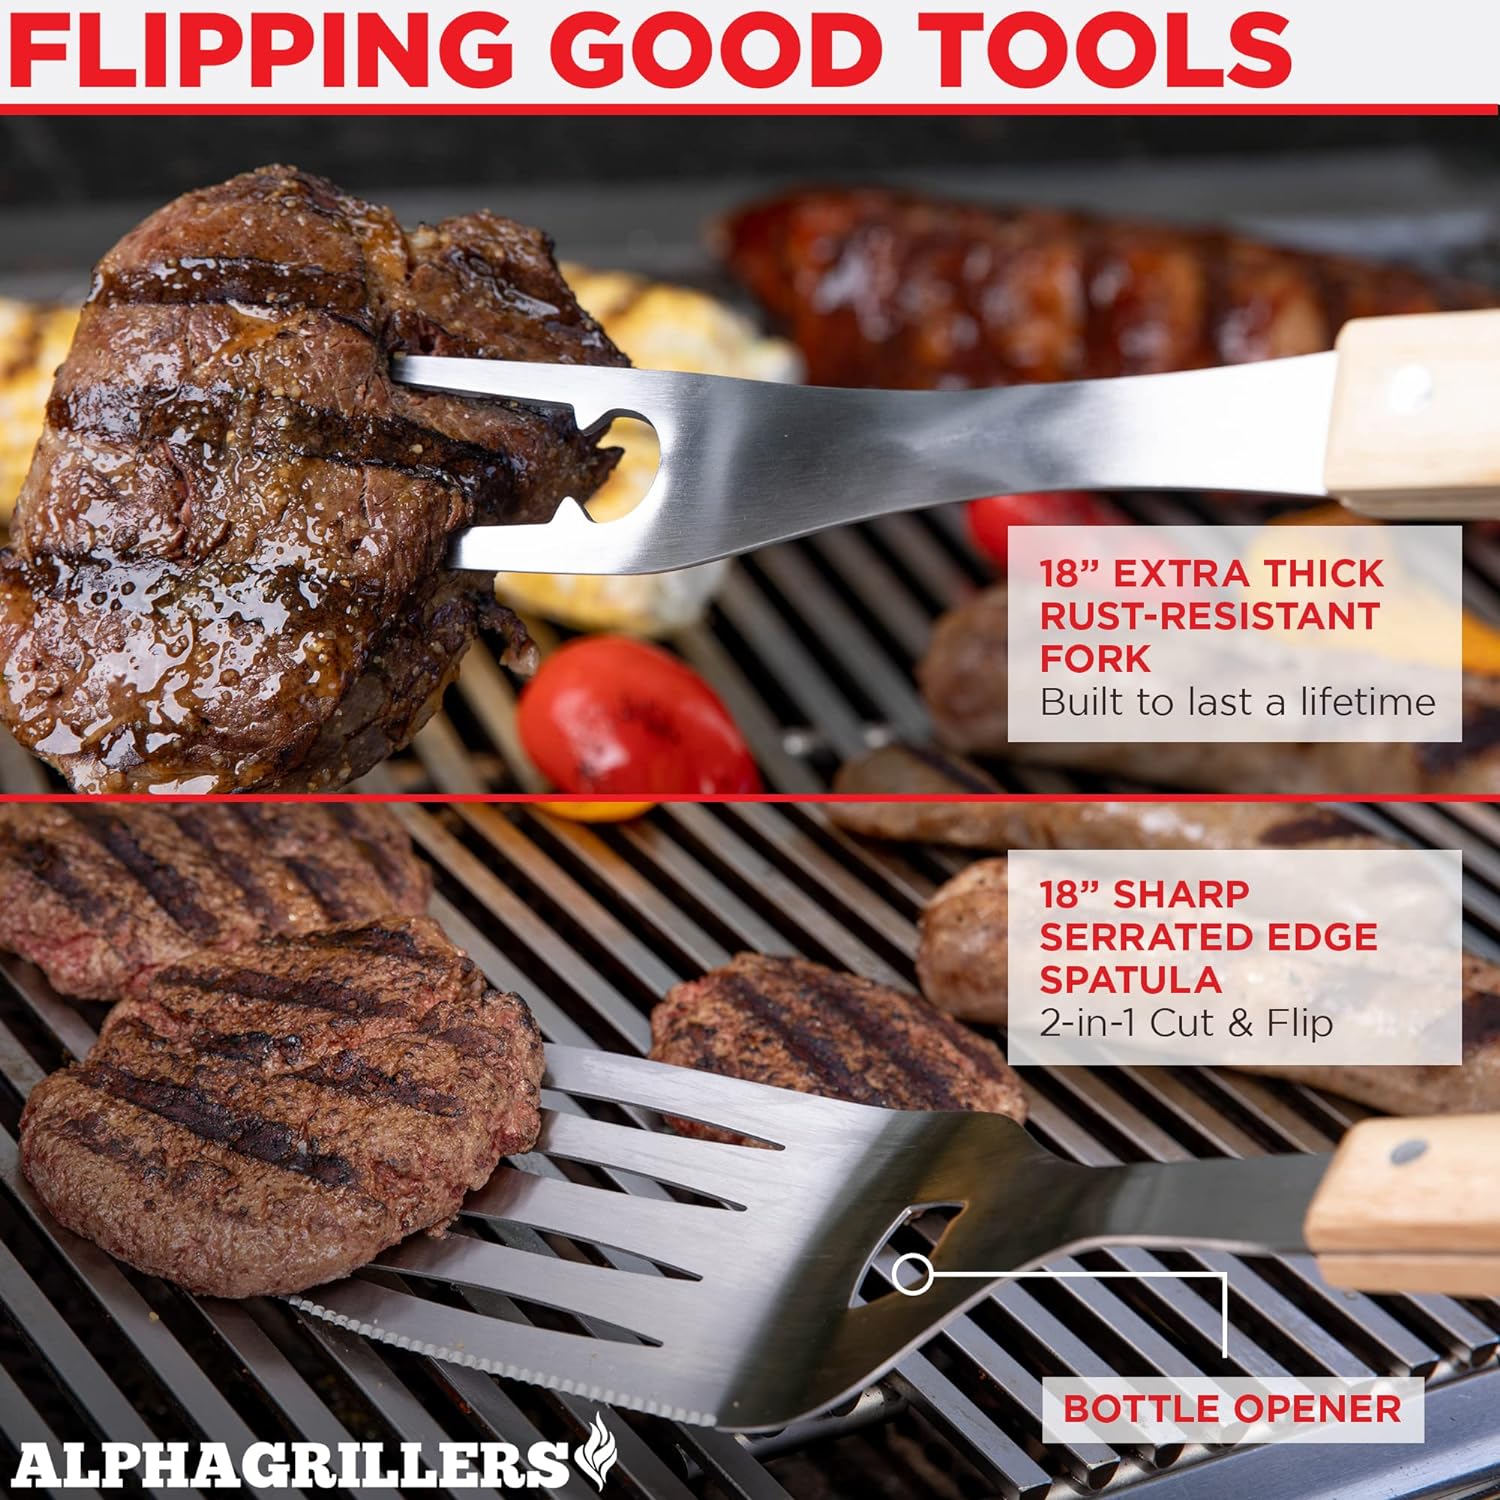 Alpha Grillers Grill Set Heavy Duty BBQ Accessories - BBQ Gifts Tool Set 4pc Grill Accessories with Spatula, Fork, Brush  BBQ Tongs - Grilling Cooking Gifts for Men Dad Durable, Stainless Steel